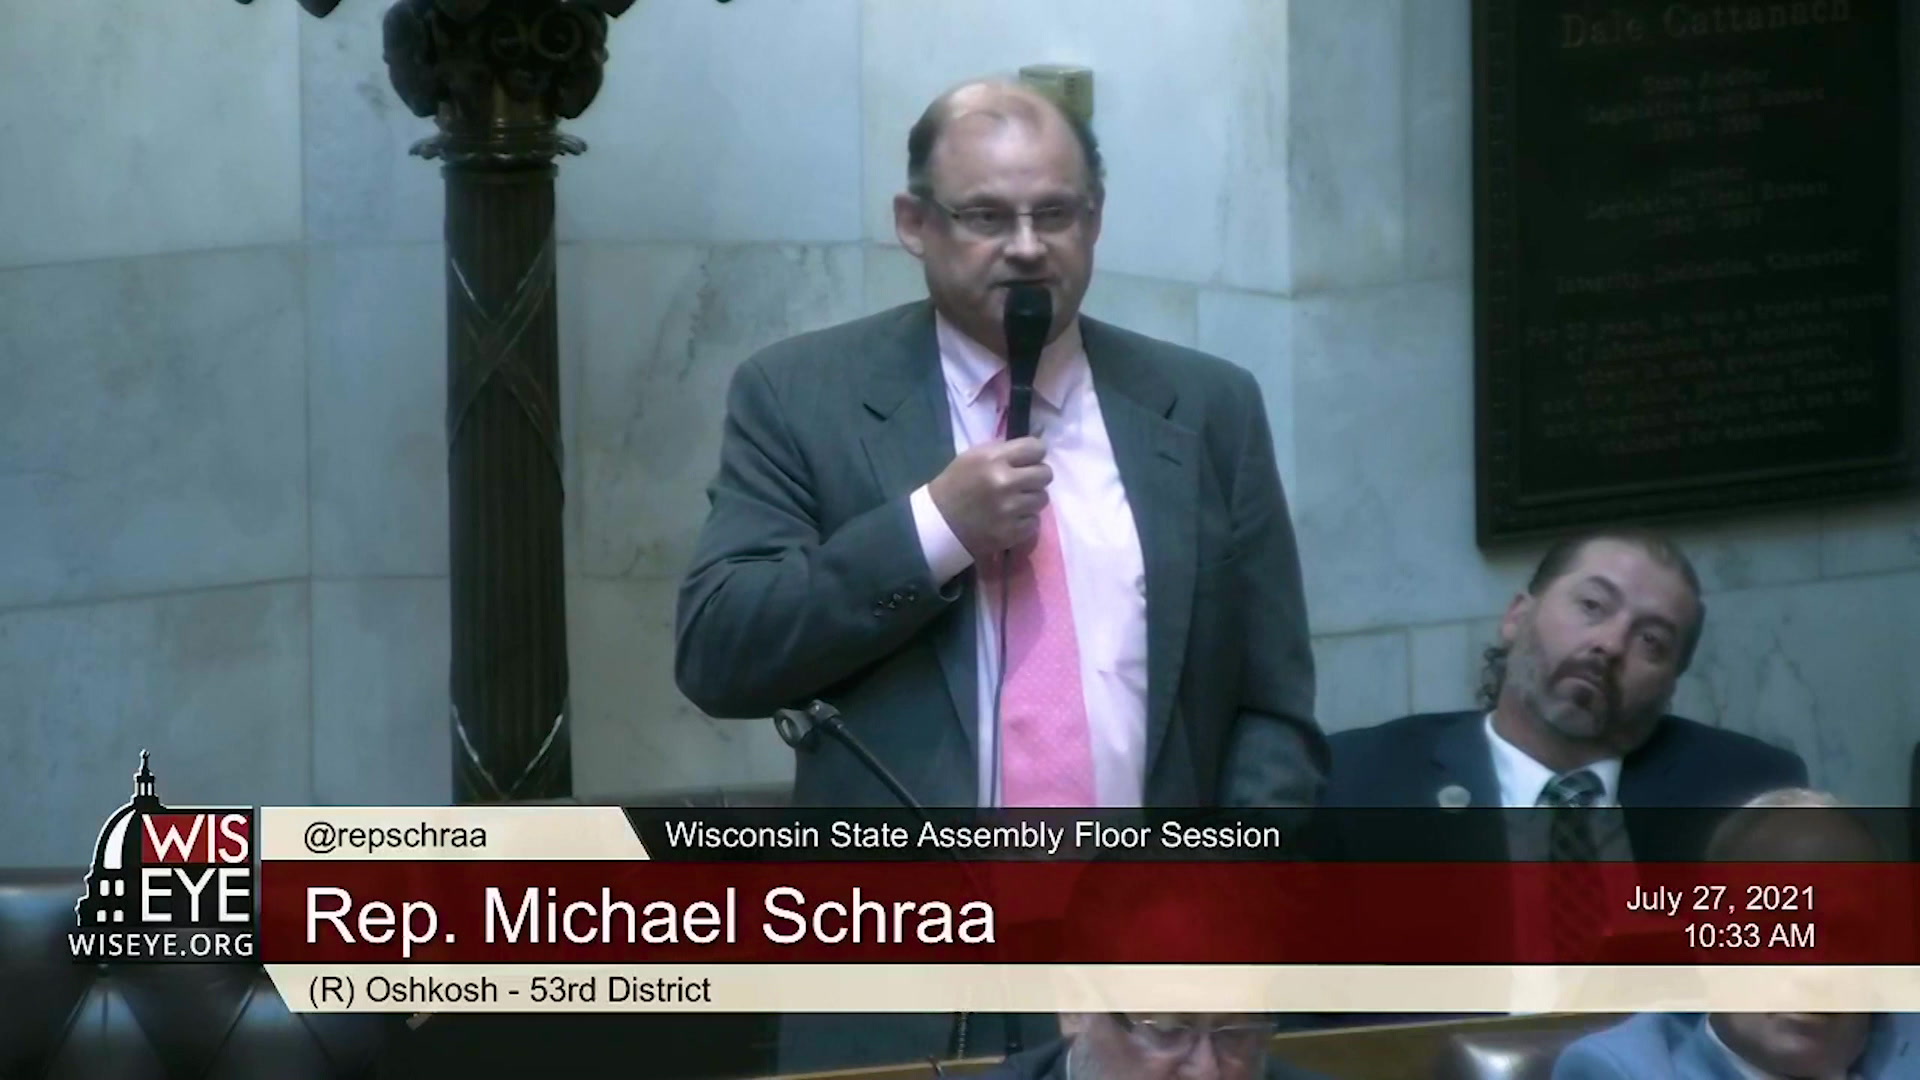 Michael Schraa holds a microphone and speaks in the Wisconsin Assembly chambers.